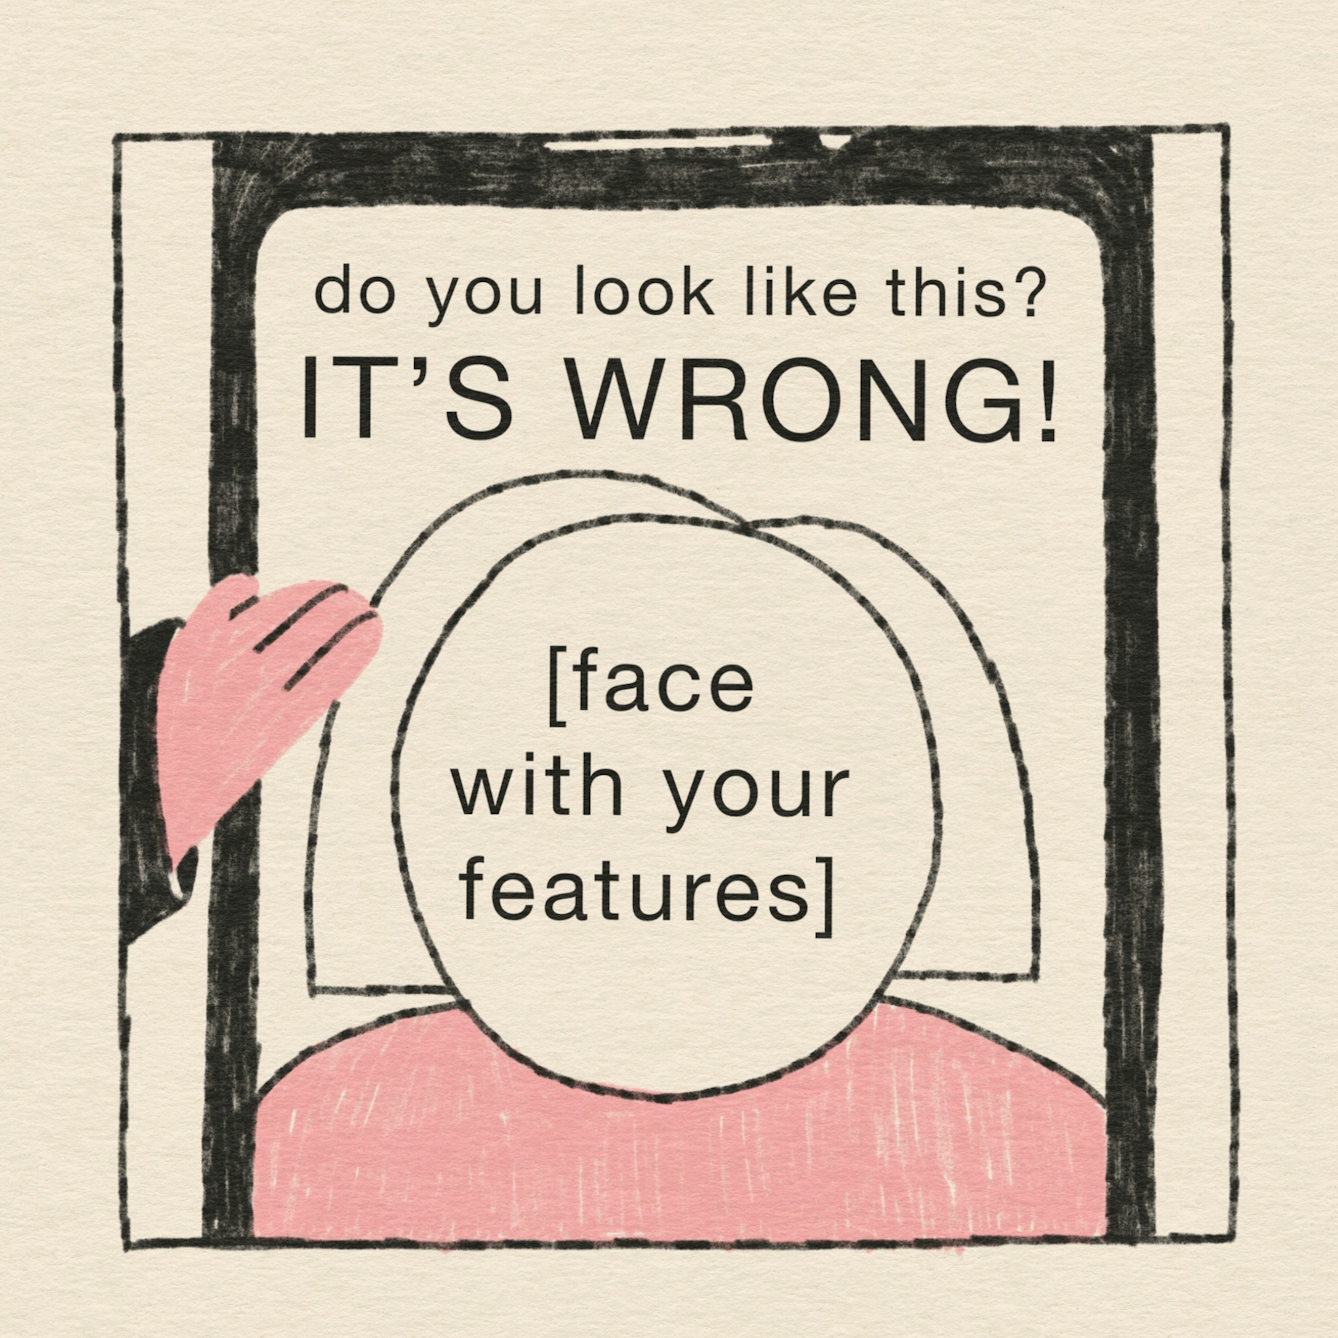 Panel 3 of 4: The rabbit unveils his proposed advert. “Do you look like this? IT’S WRONG! [face with your features]”.